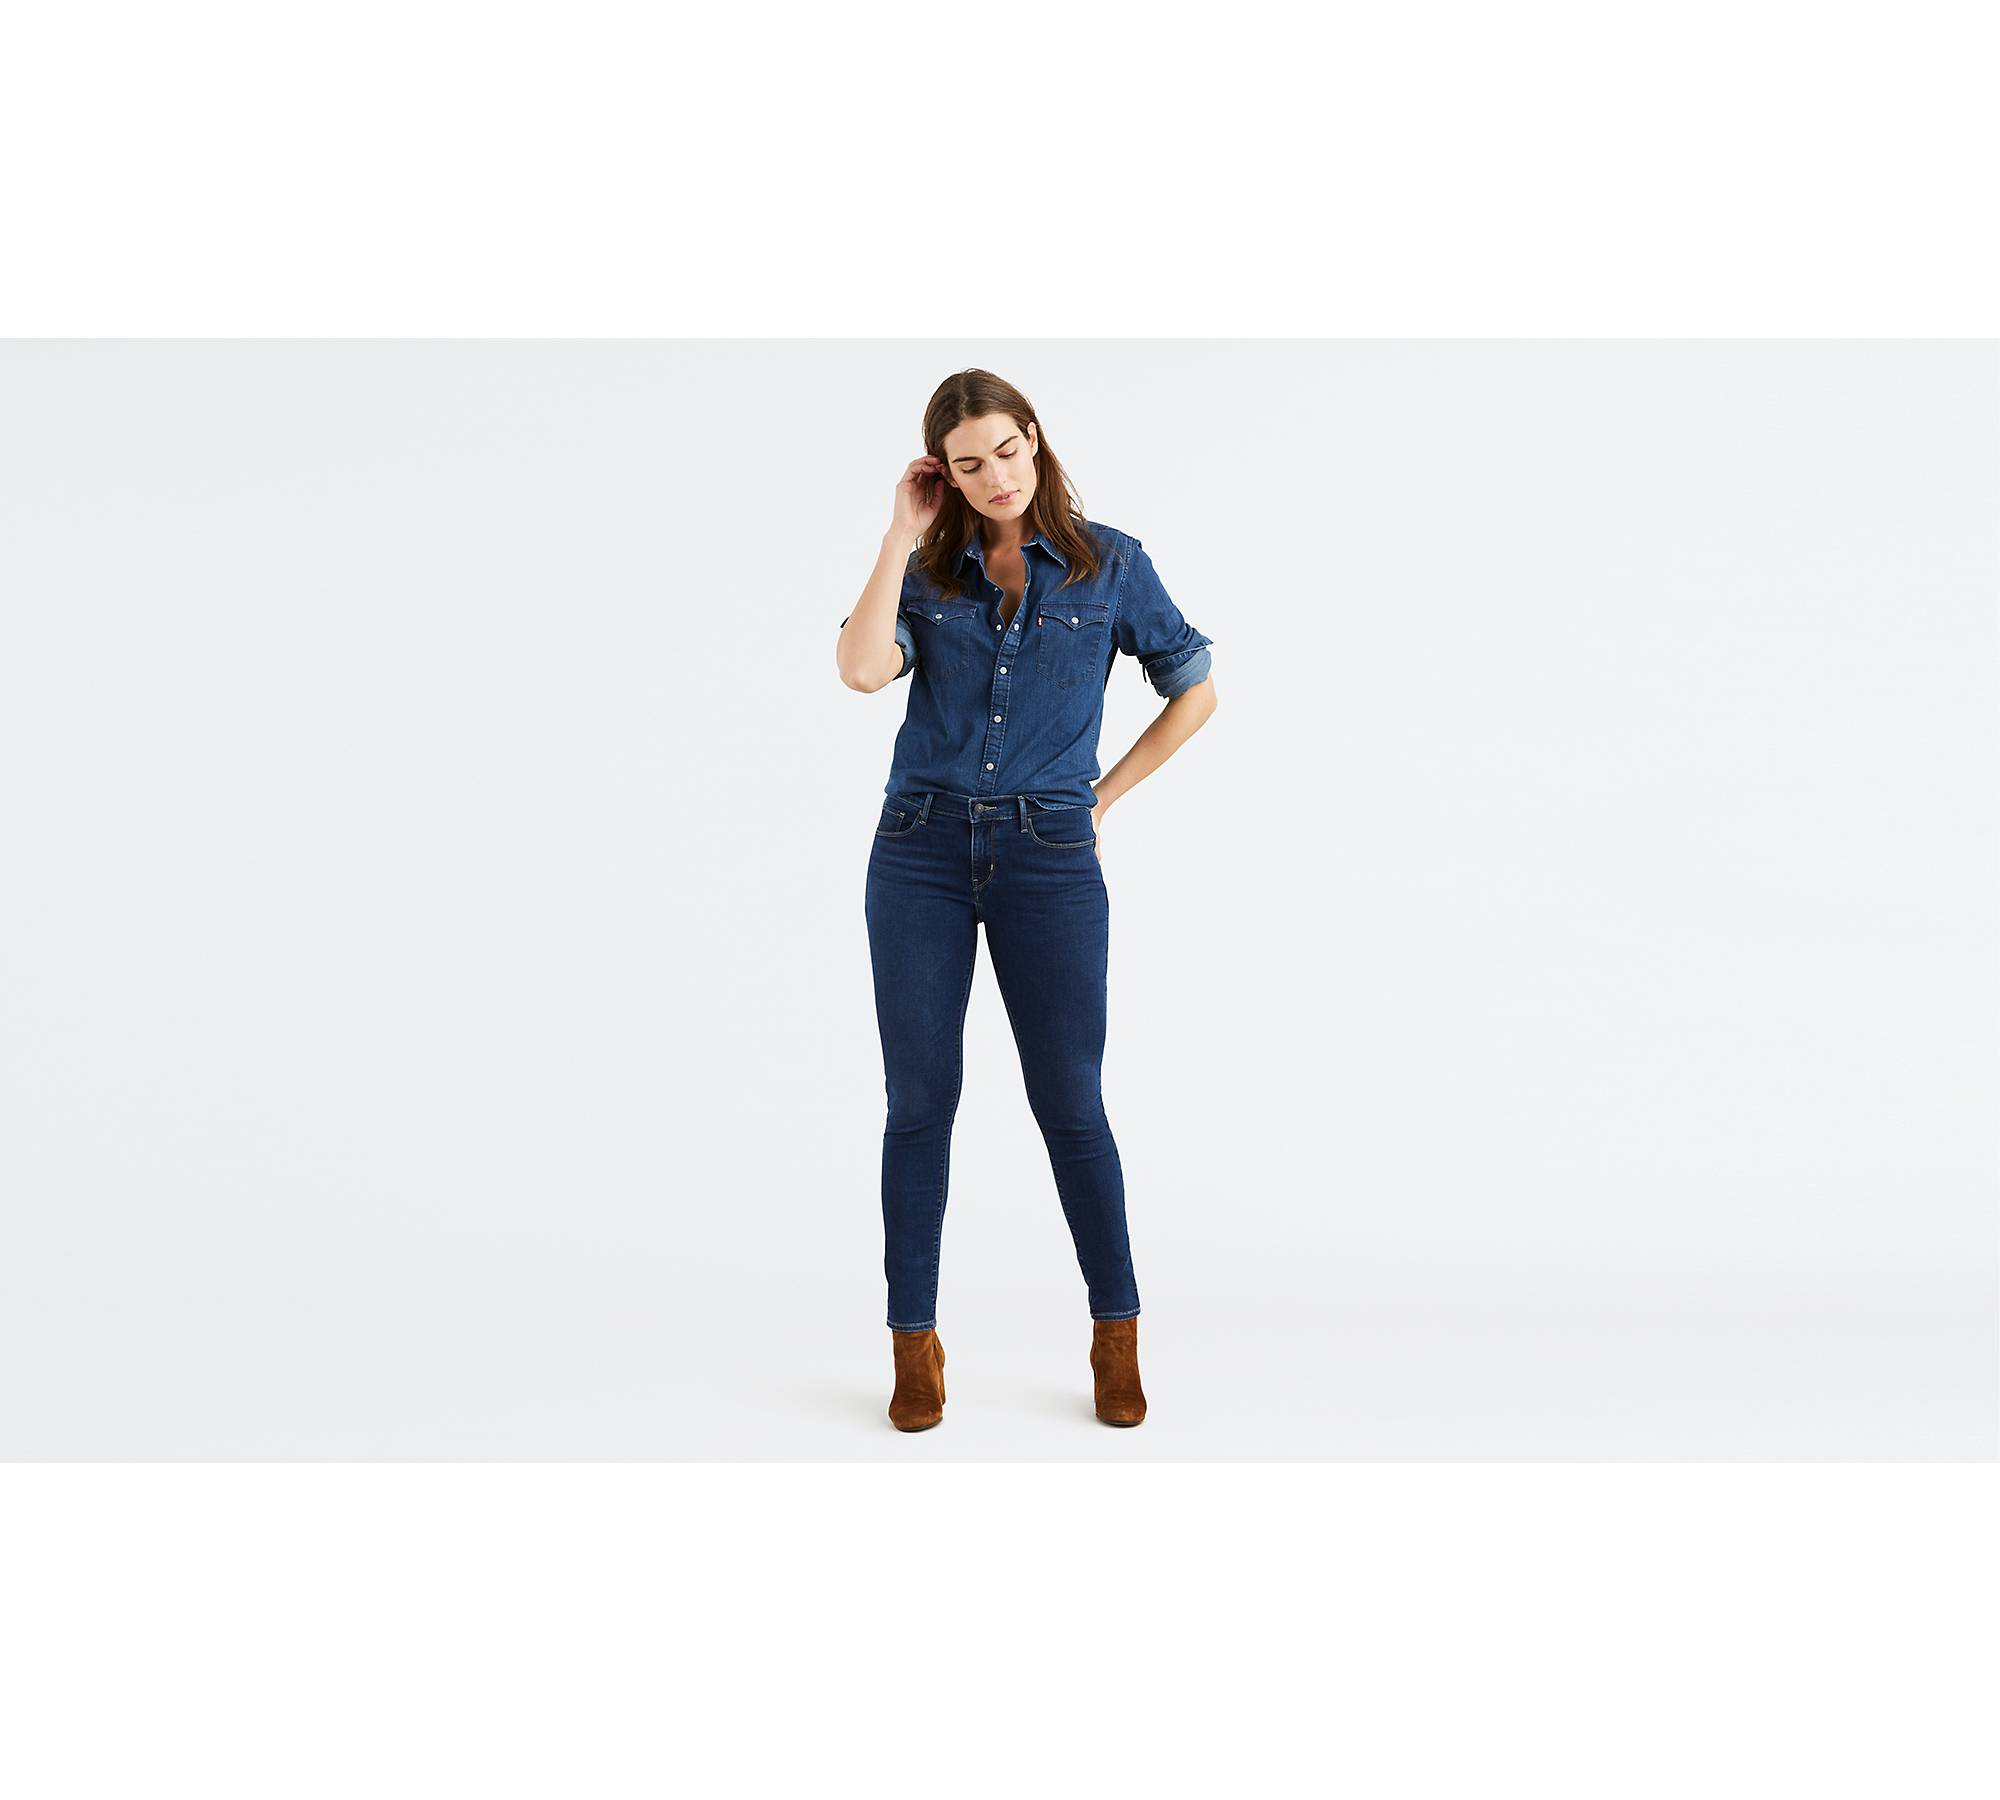  Simplicity Women's Average, Slim, and Curvy Fit Jeans